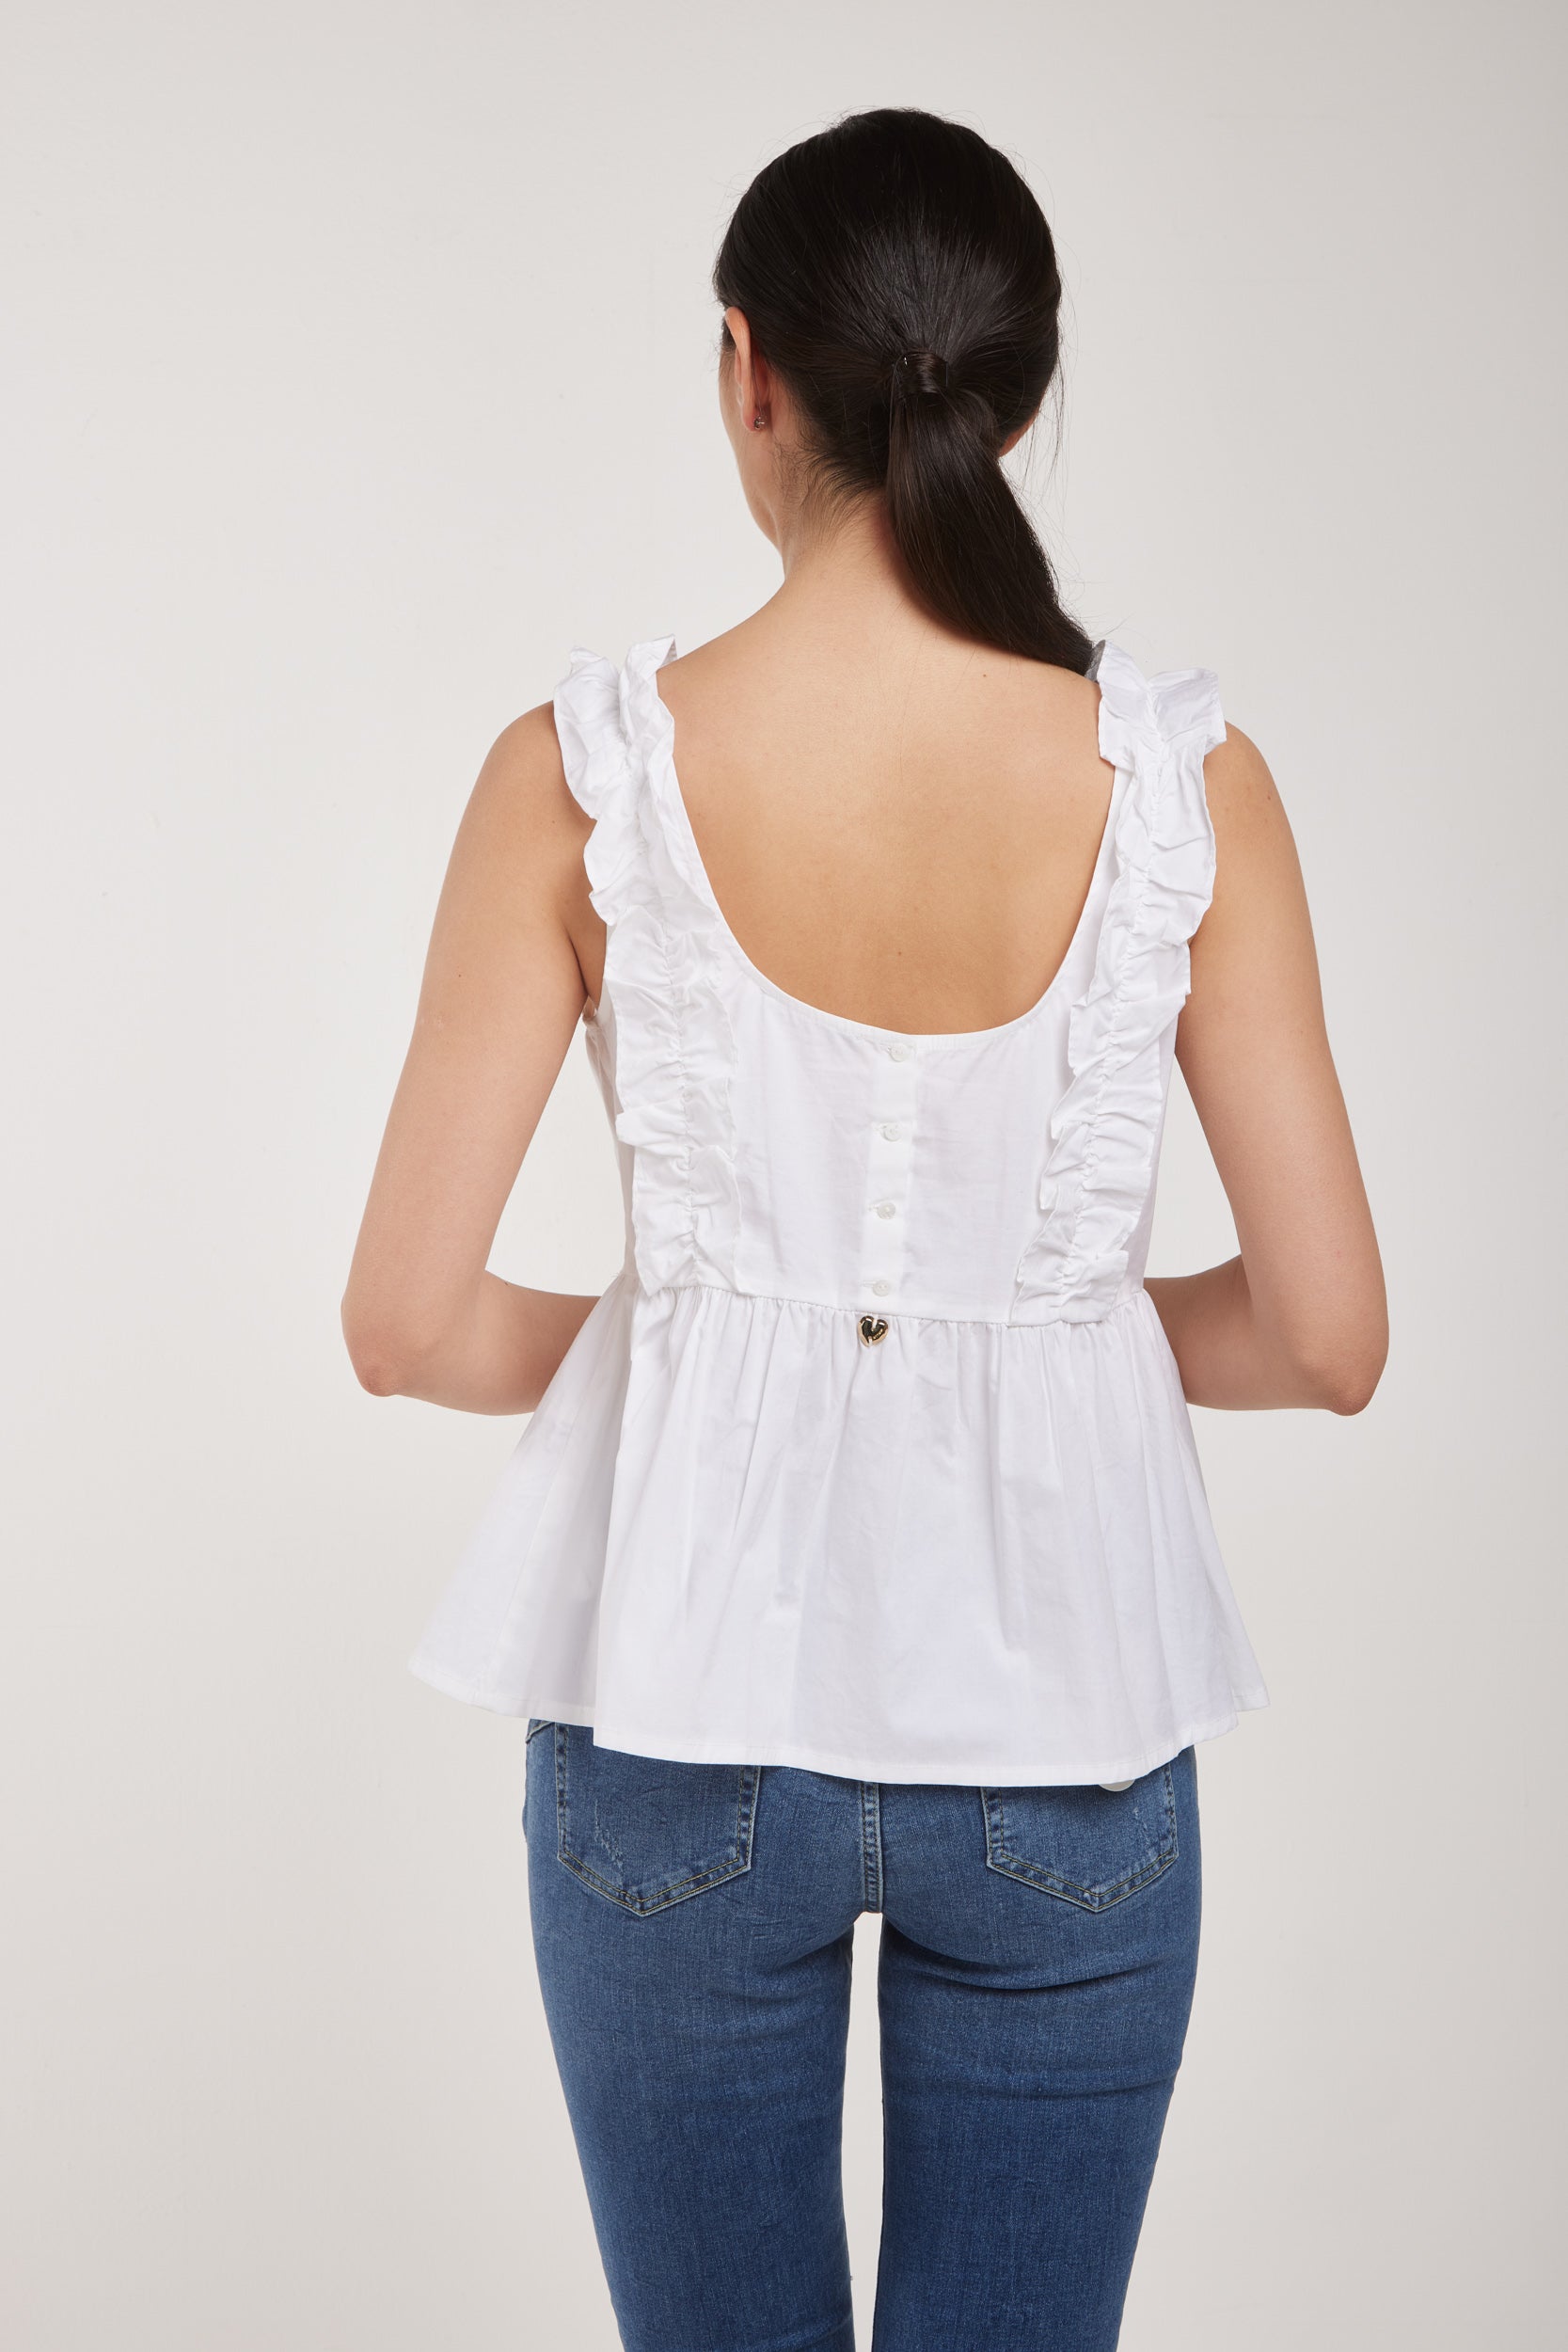 TWINSET White Screwed Top